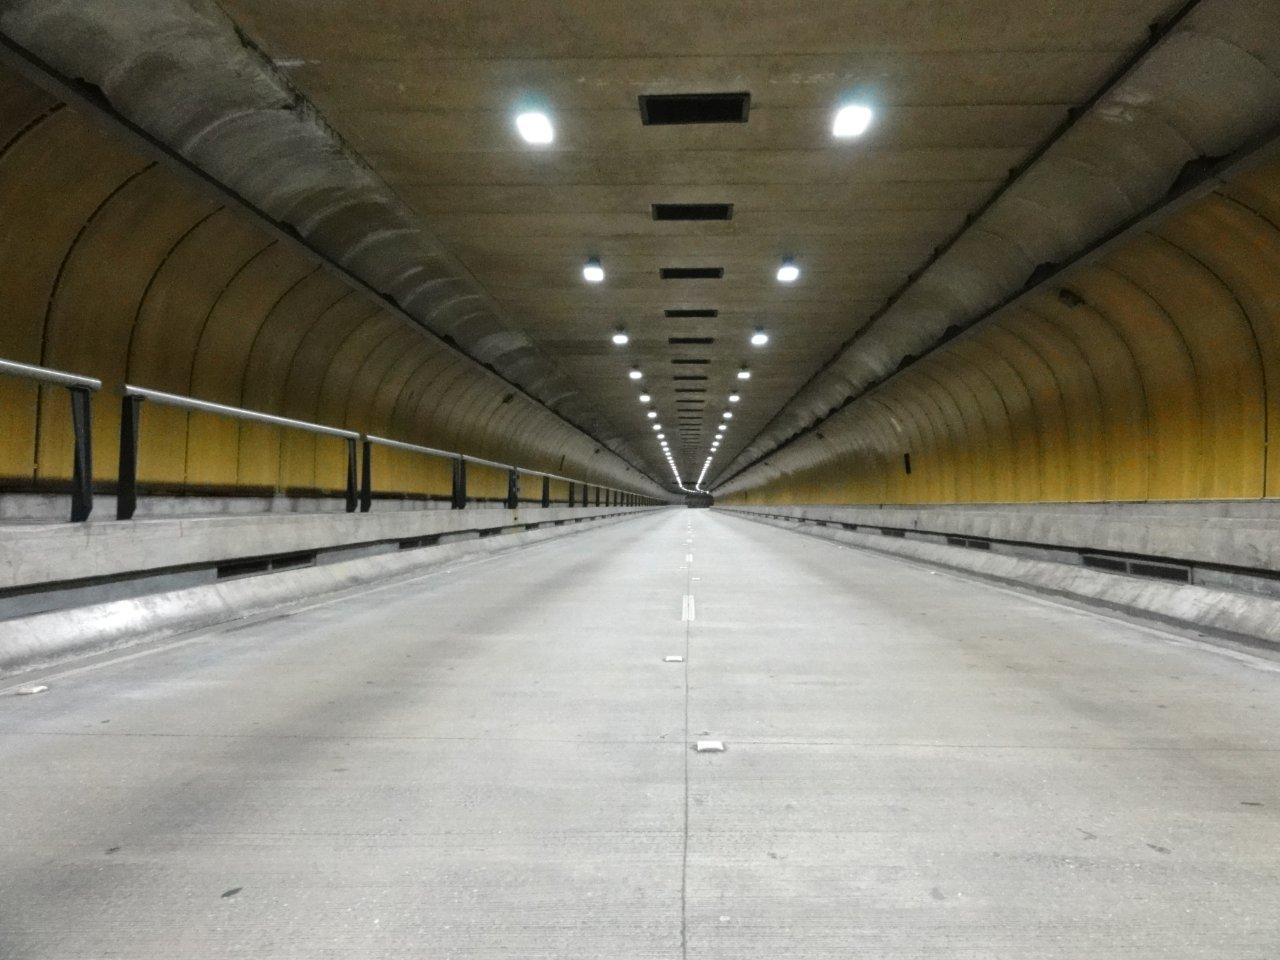 Comparisons between conventional tunnel lighting technology and LED tunnel lighting technology